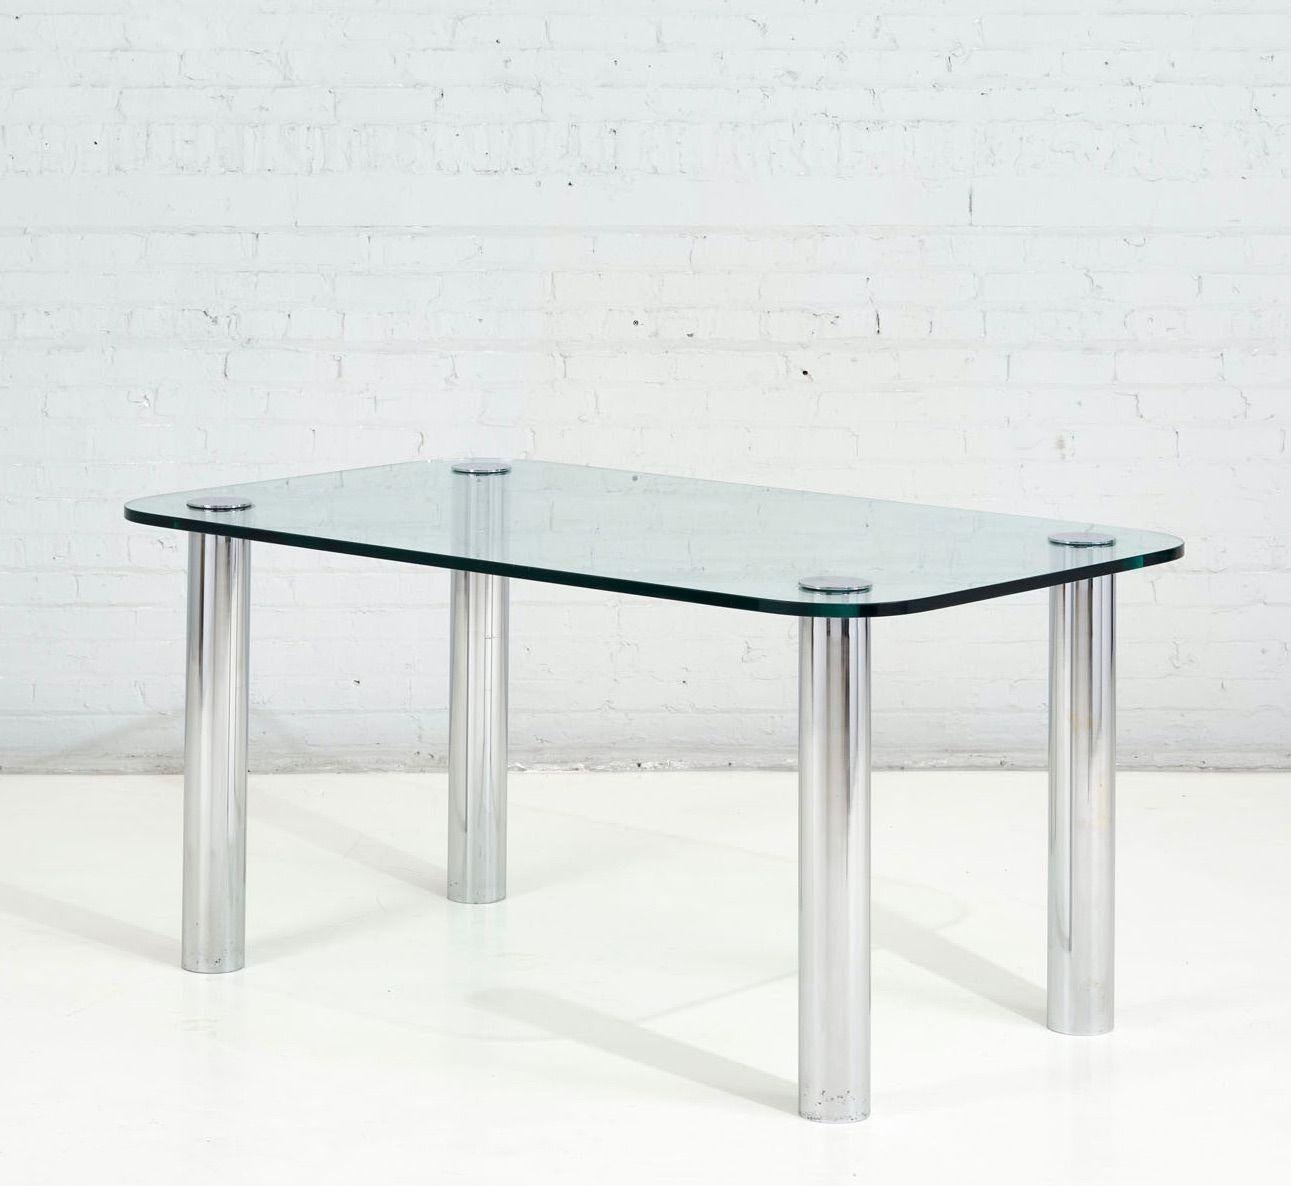 Pace Collection chrome ad glass dining table, 1970. Original